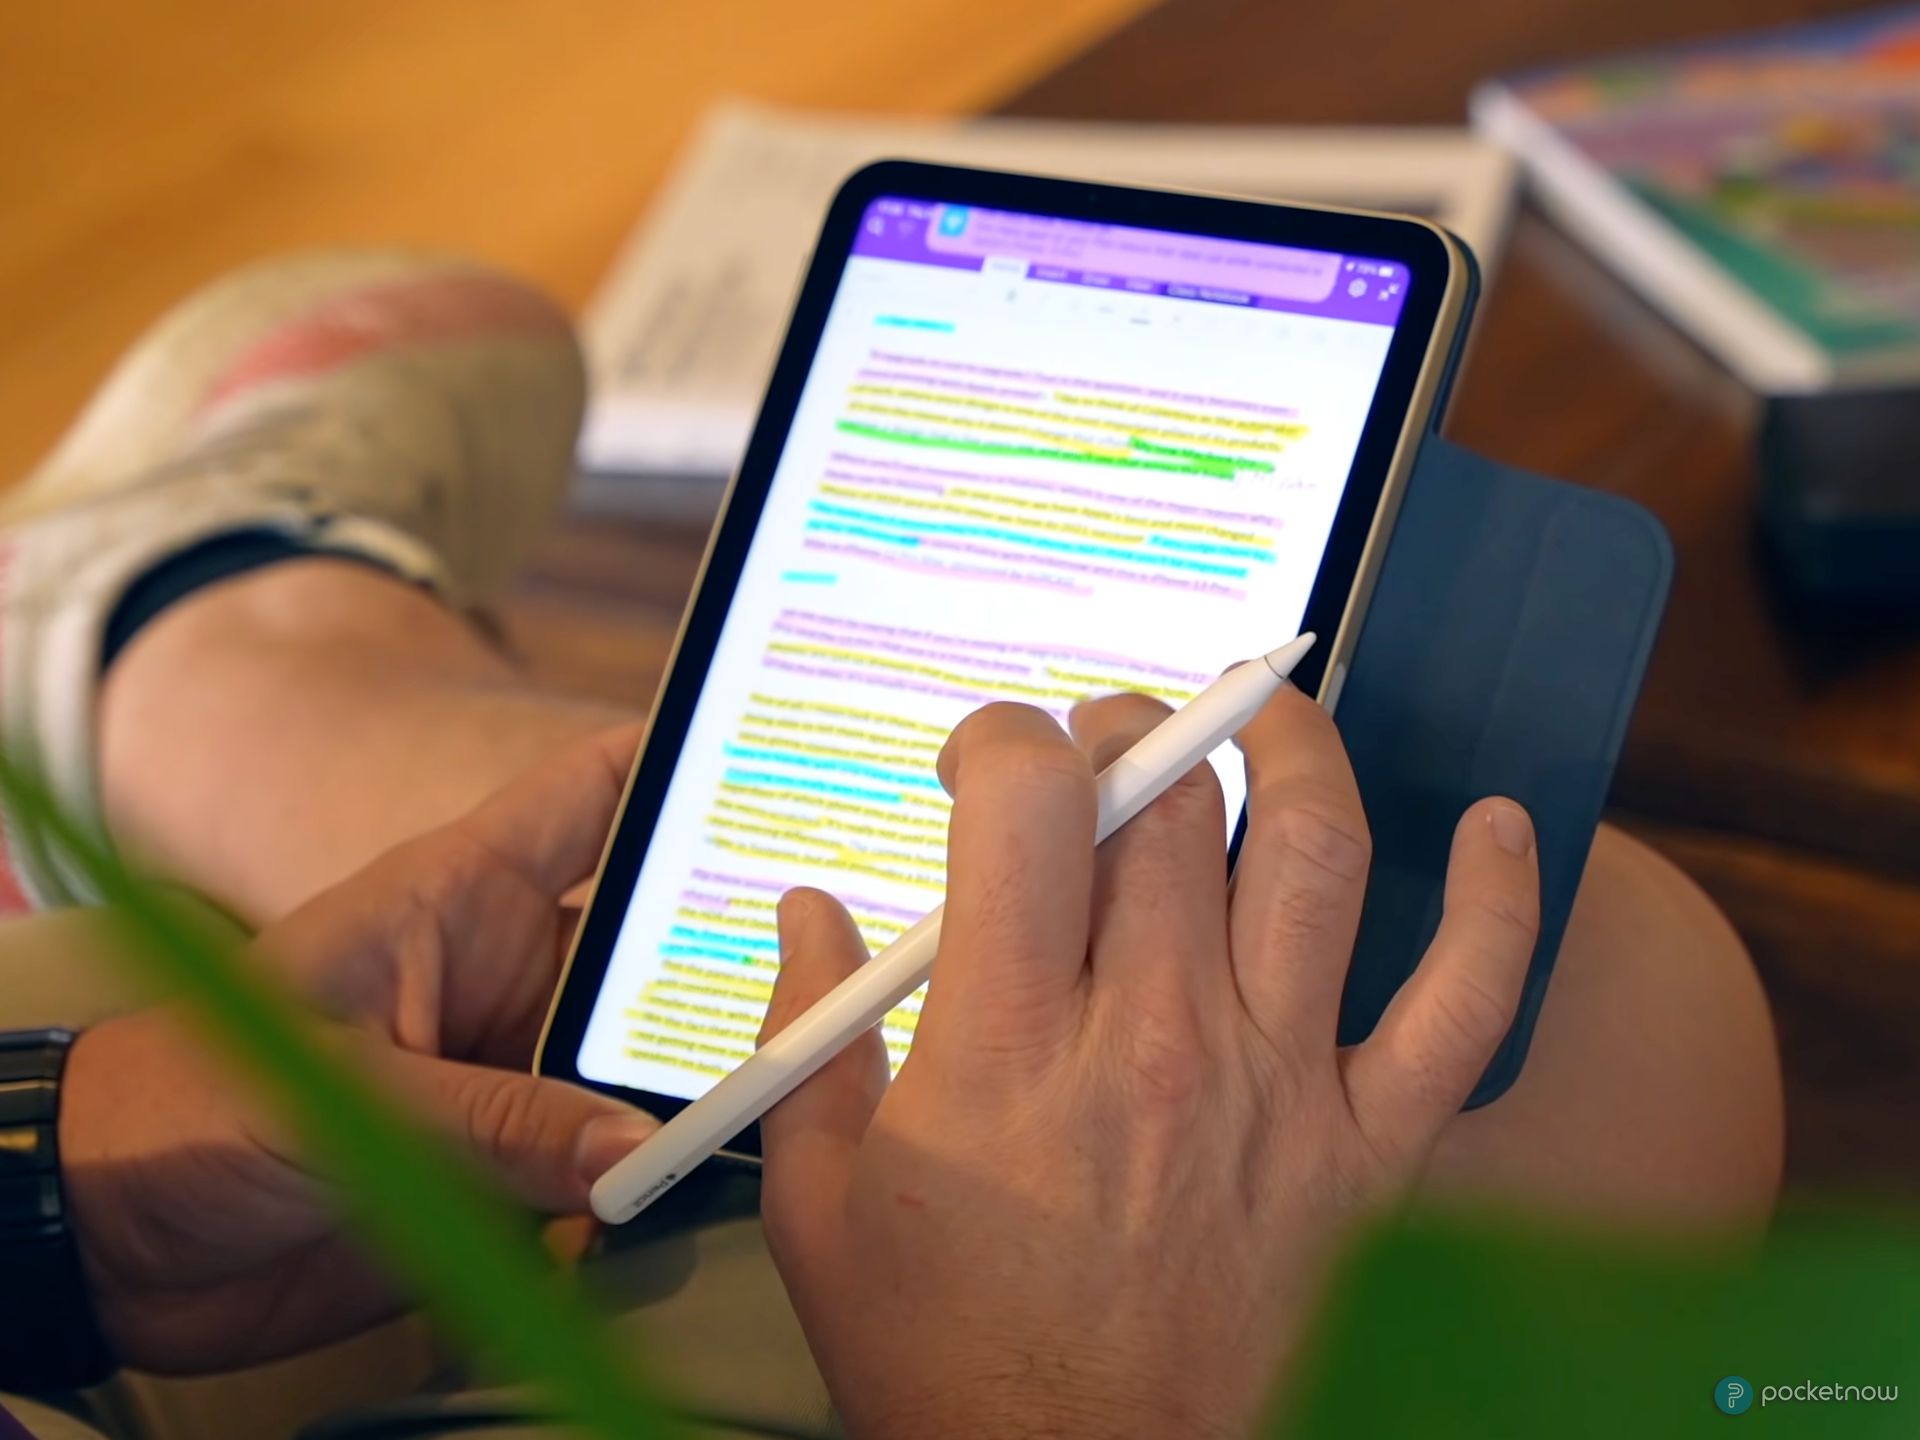 Hands on With a Pair of Lower-Cost Apple Pencil Alternatives - GeekDad